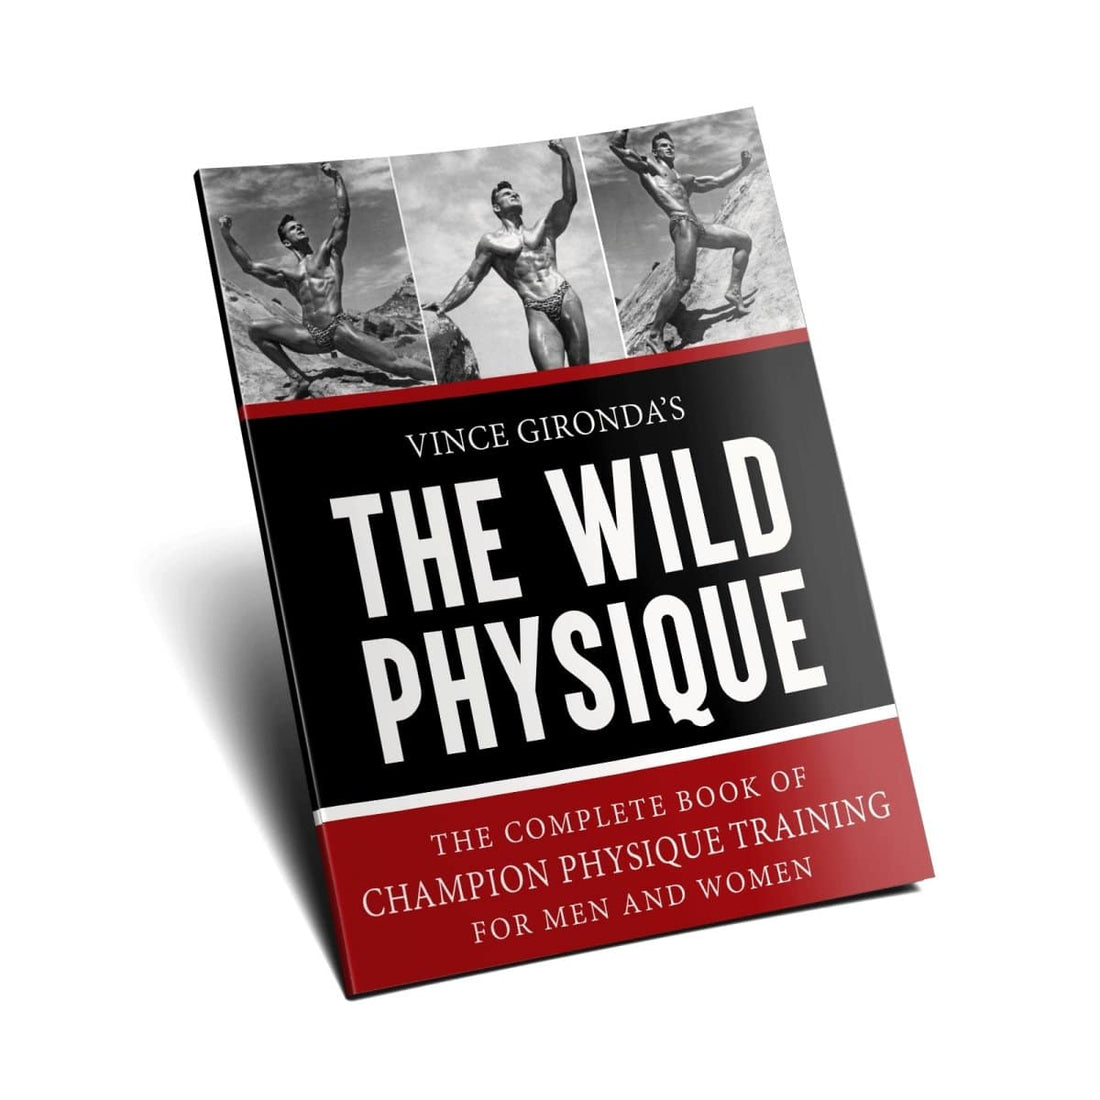 Unleashing The Wild Physique by Vince Gironda Book | NSP Nutrition